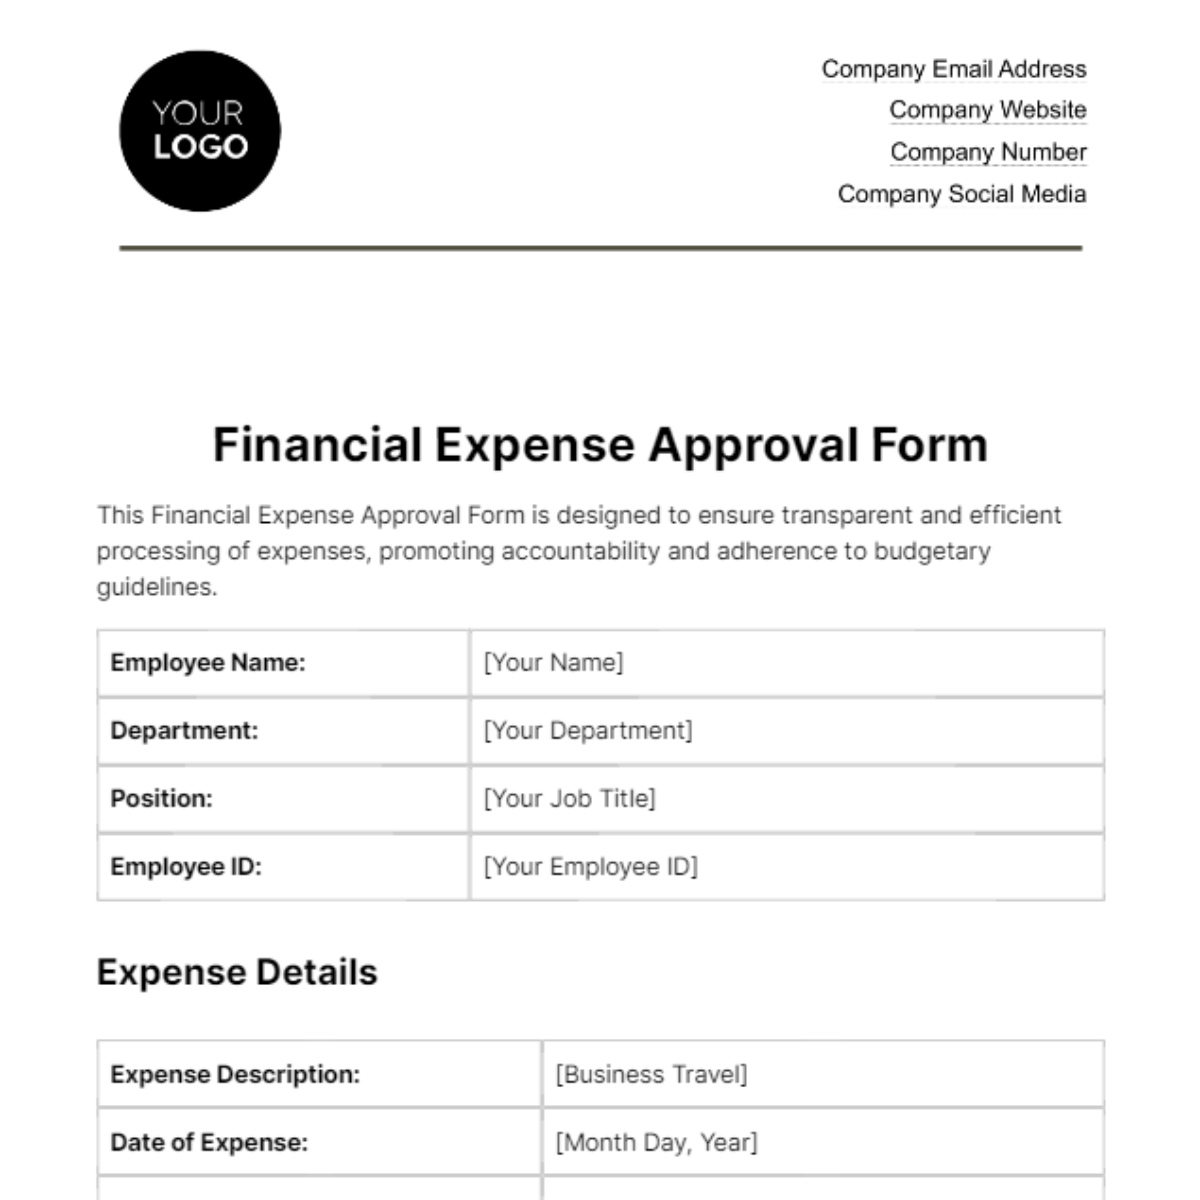 Financial Expense Approval Form Template